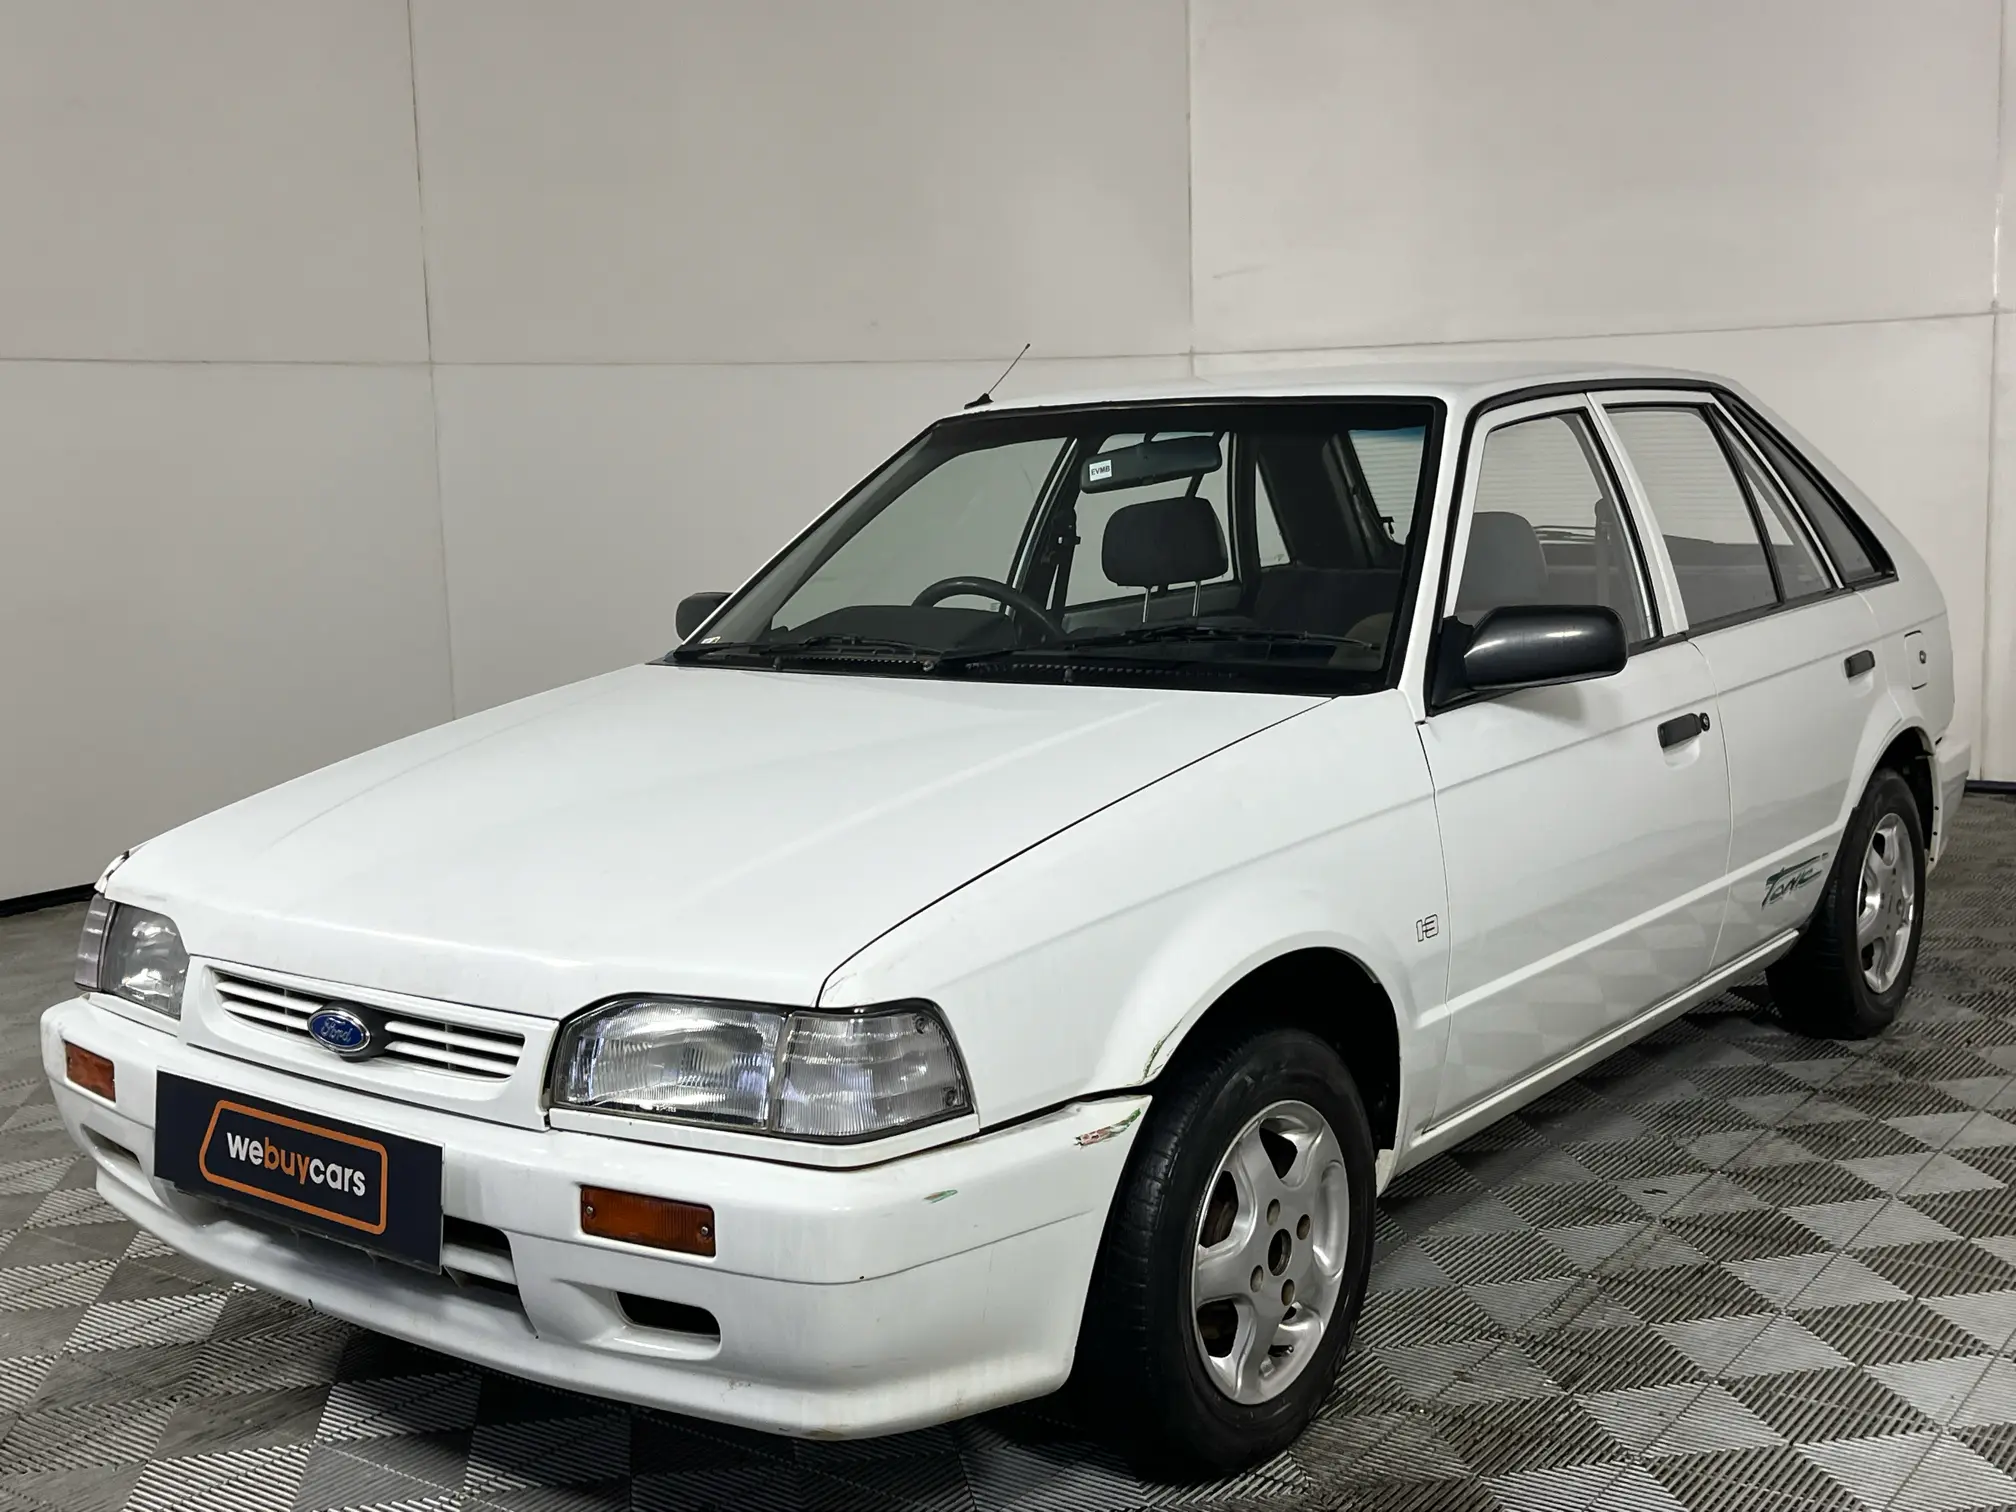 1999 Ford Laser Tracer 1.3 Tonic